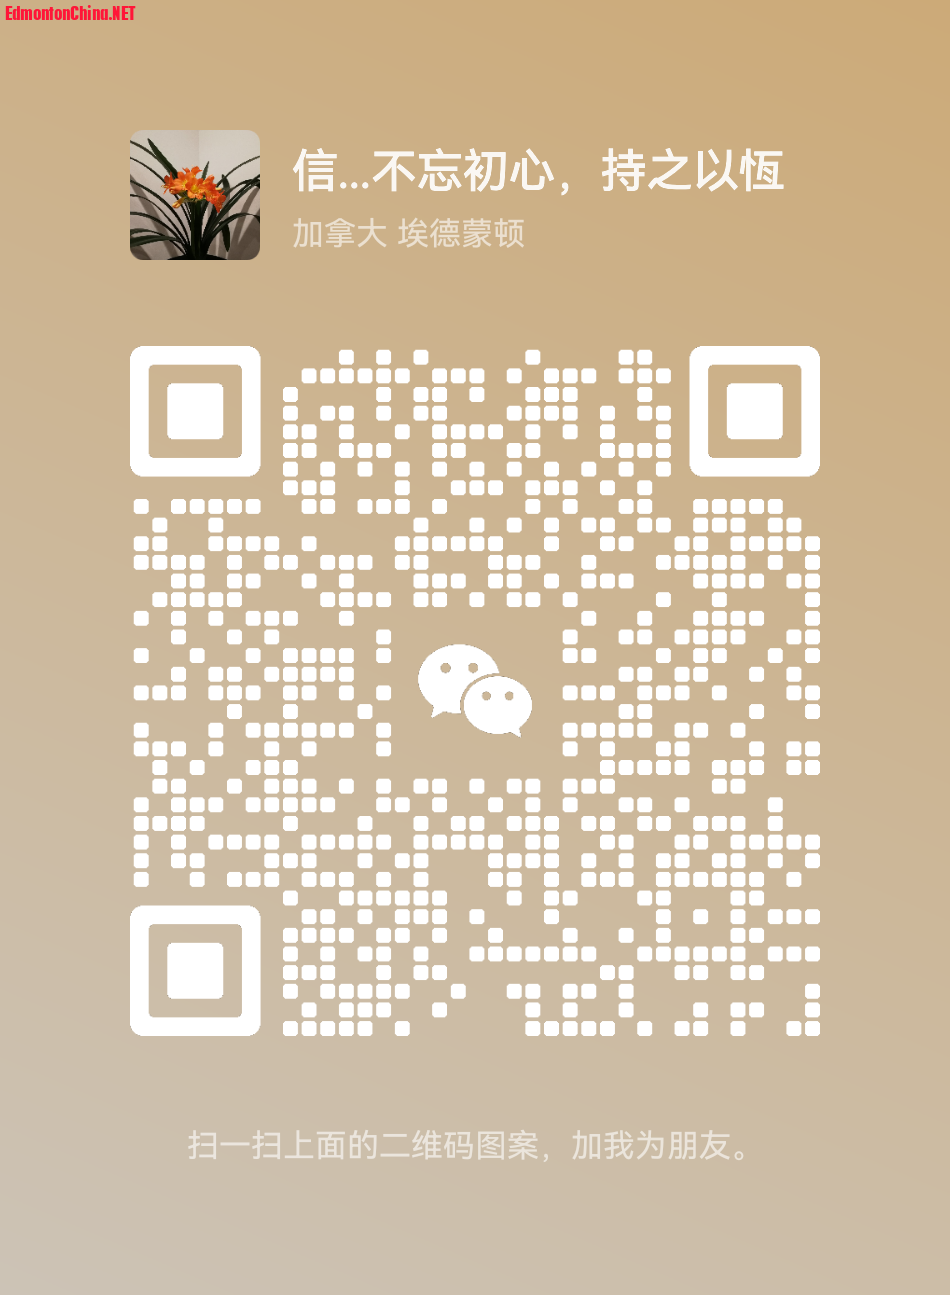 mmqrcode1692965634341.png